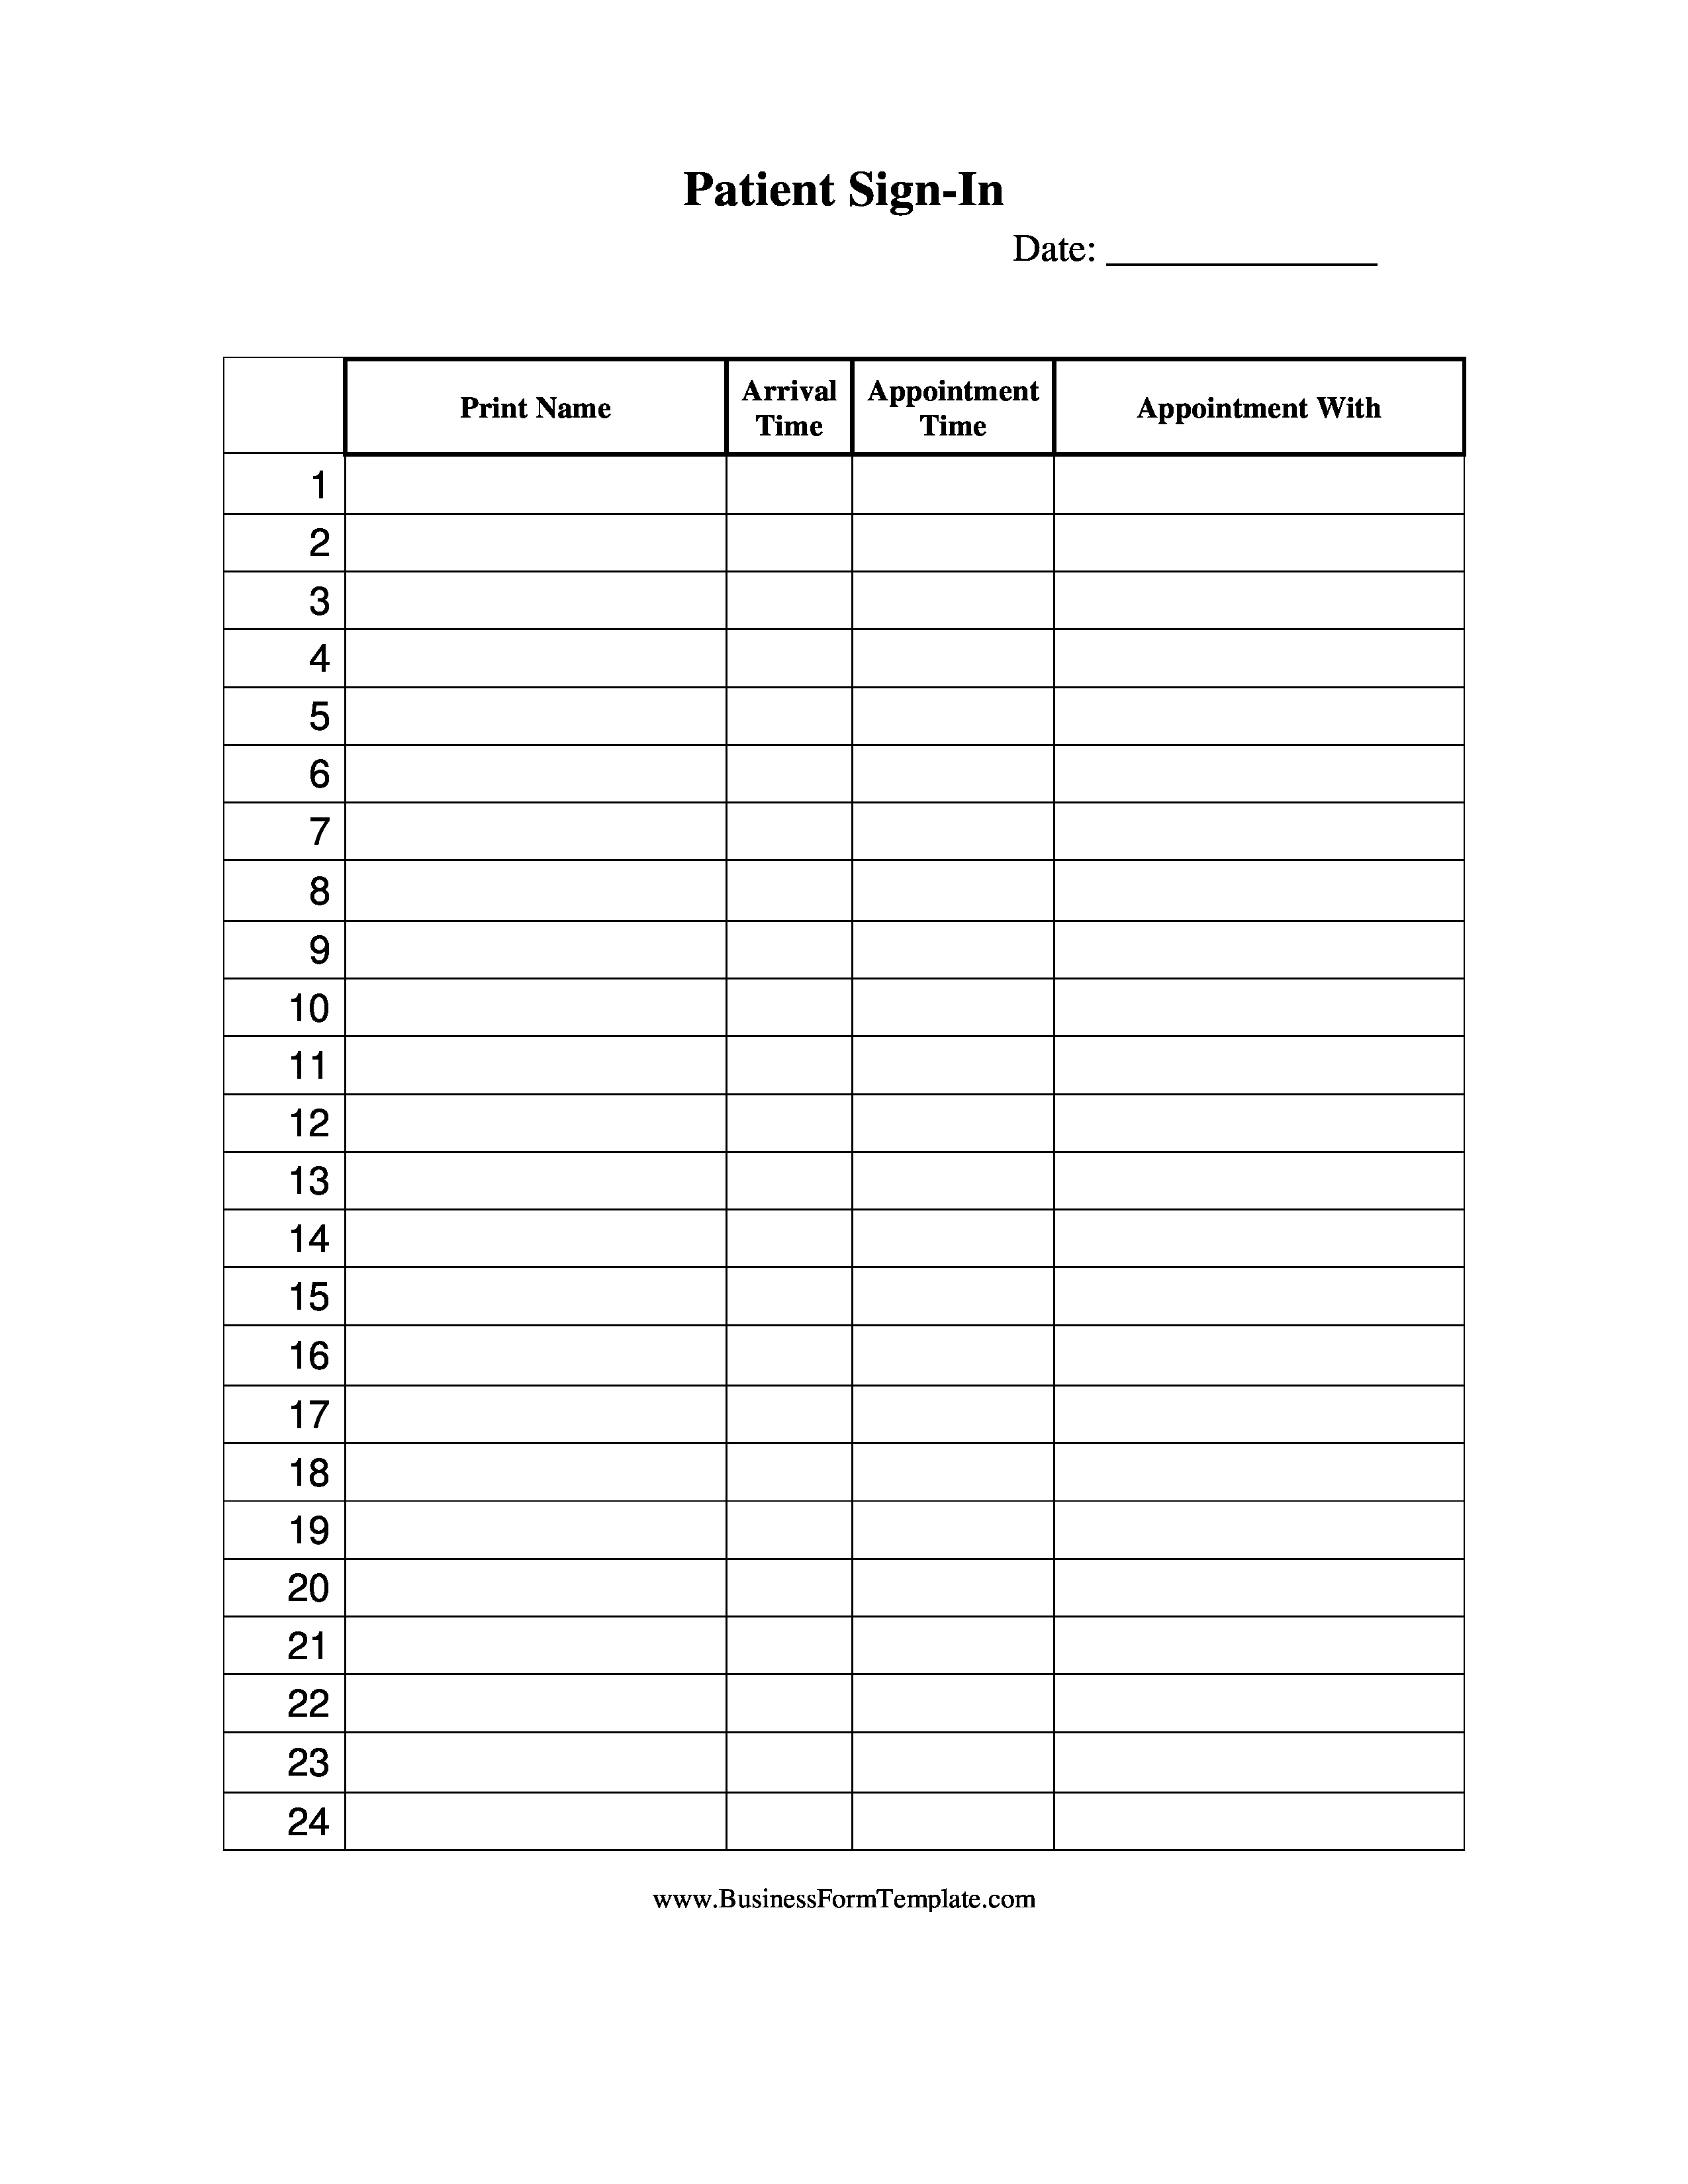 Patient Sign In Sheets Best Of Medical Patient Sign In Sheet How to Create A Medical Patient Sign In Sheet Download This